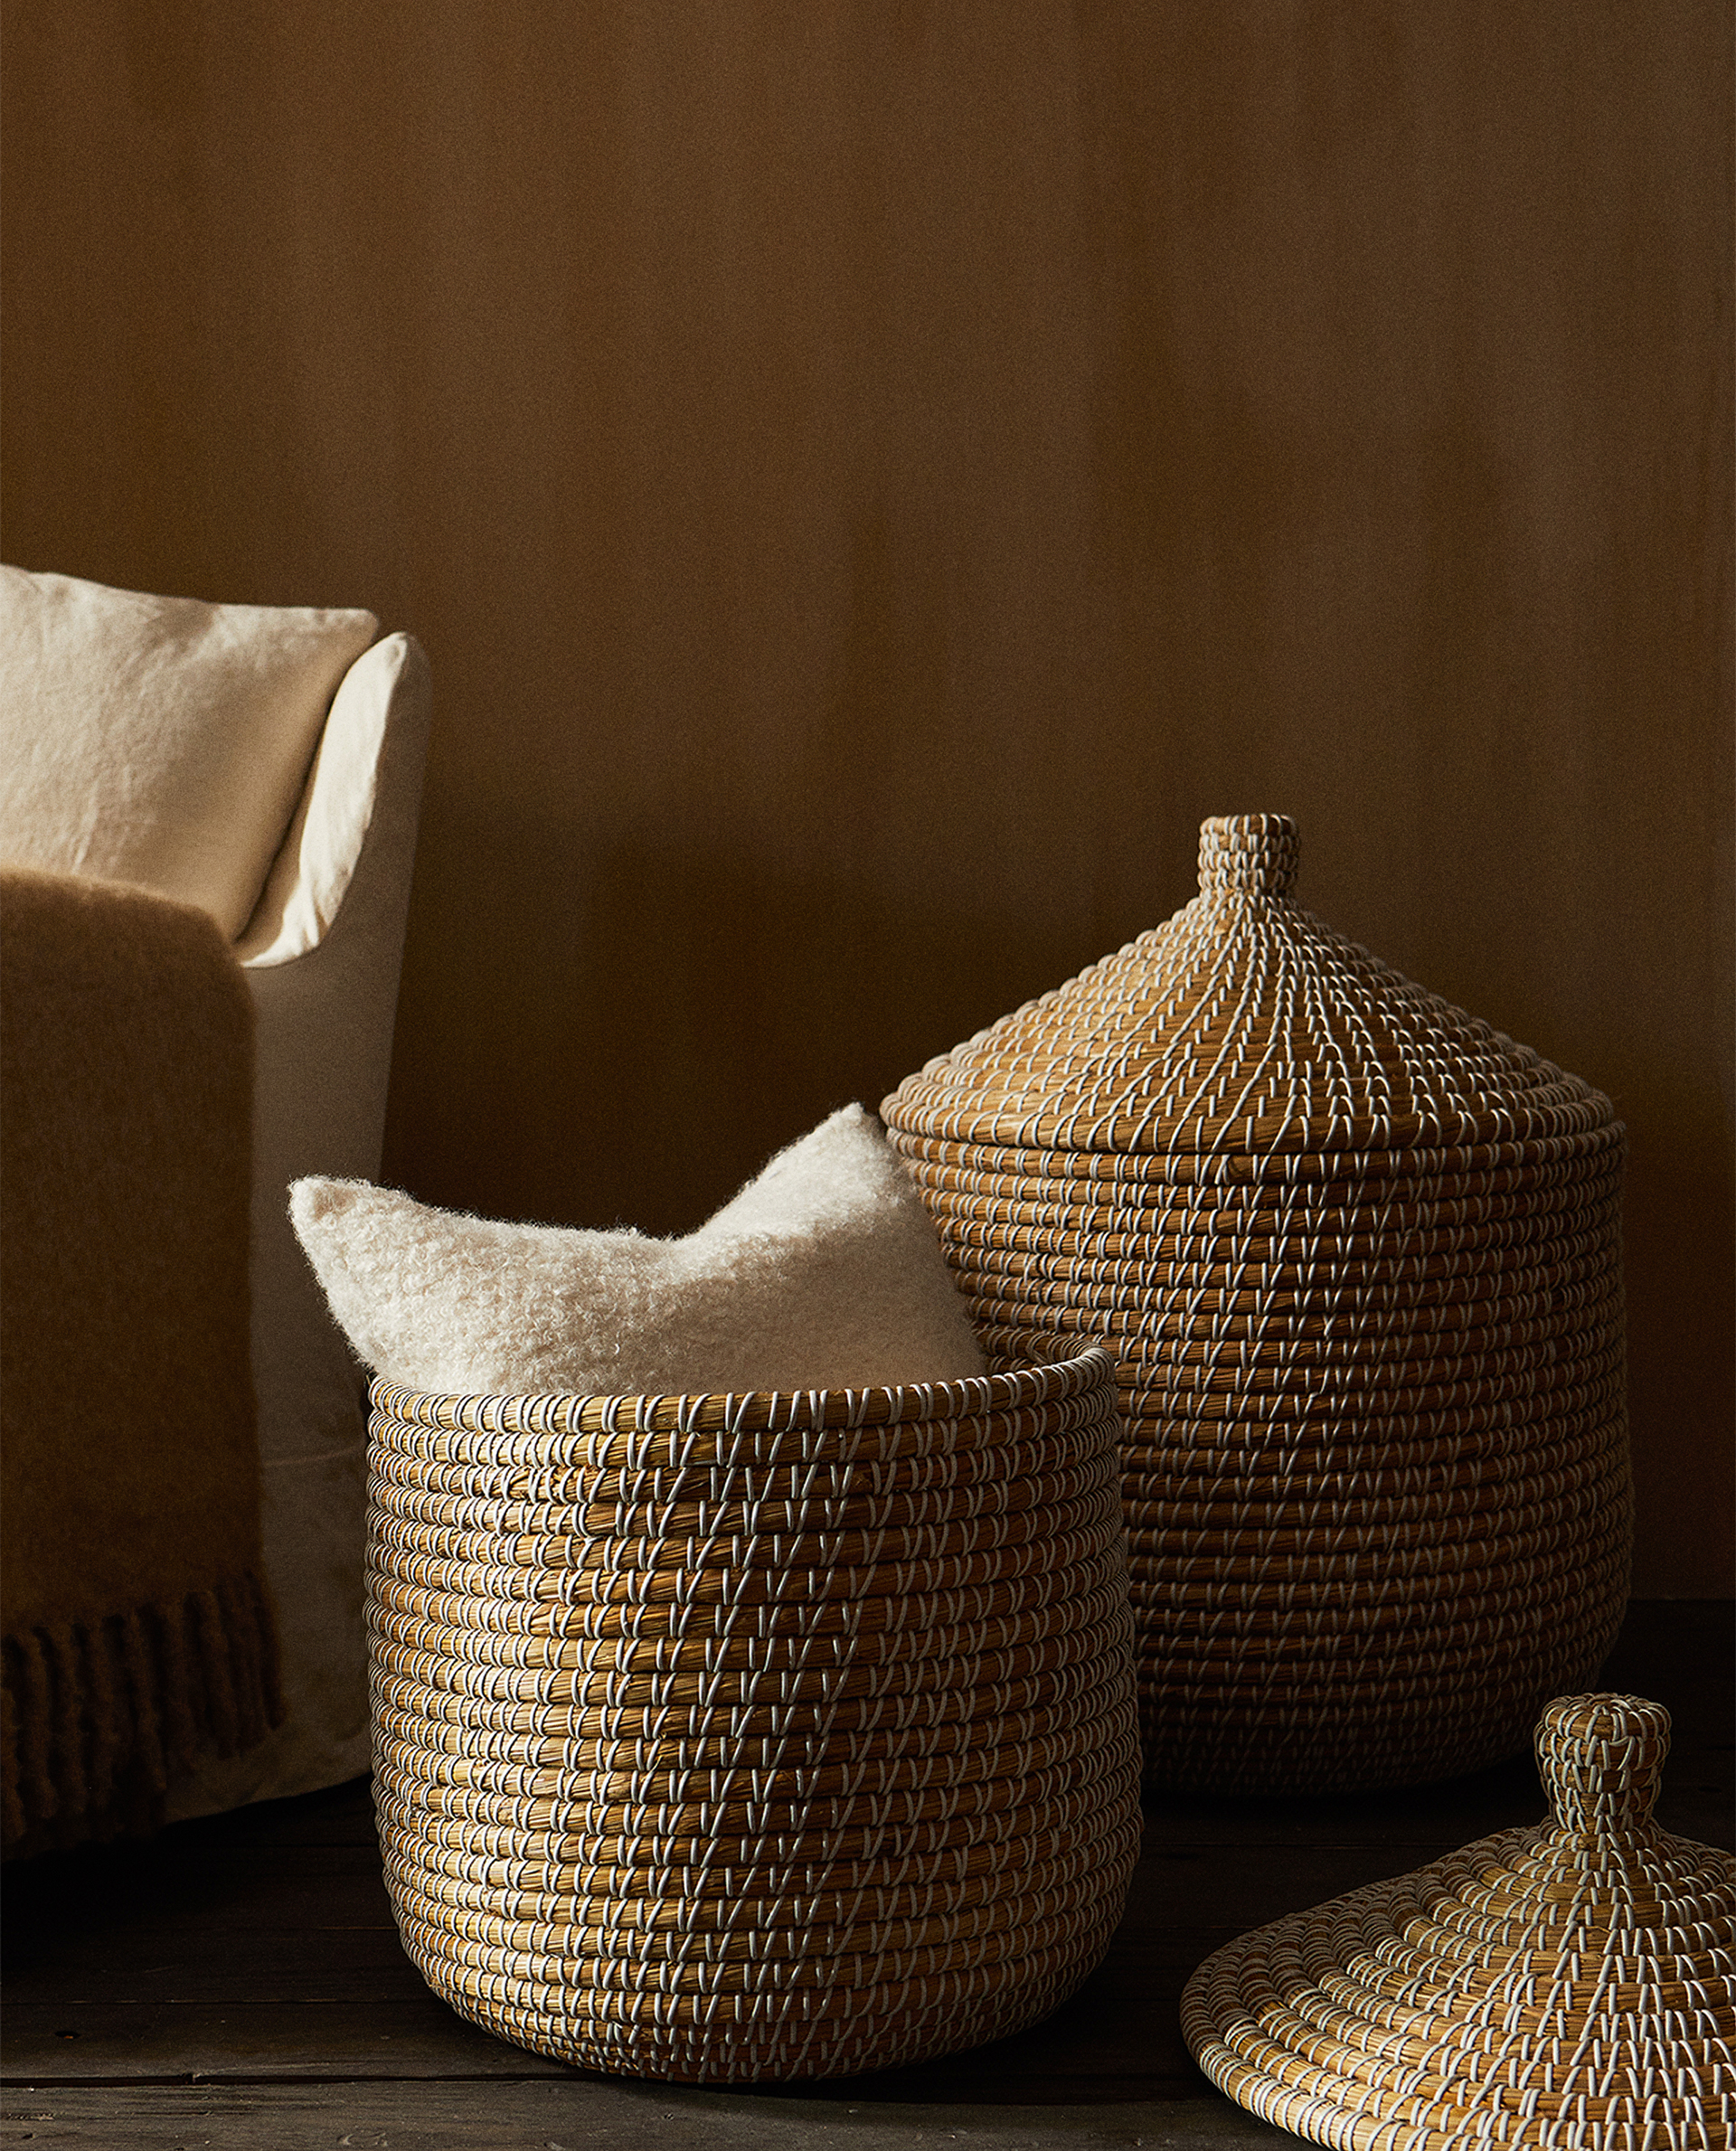 Round Basket With Lid Bedspreads, Round Lidded Baskets